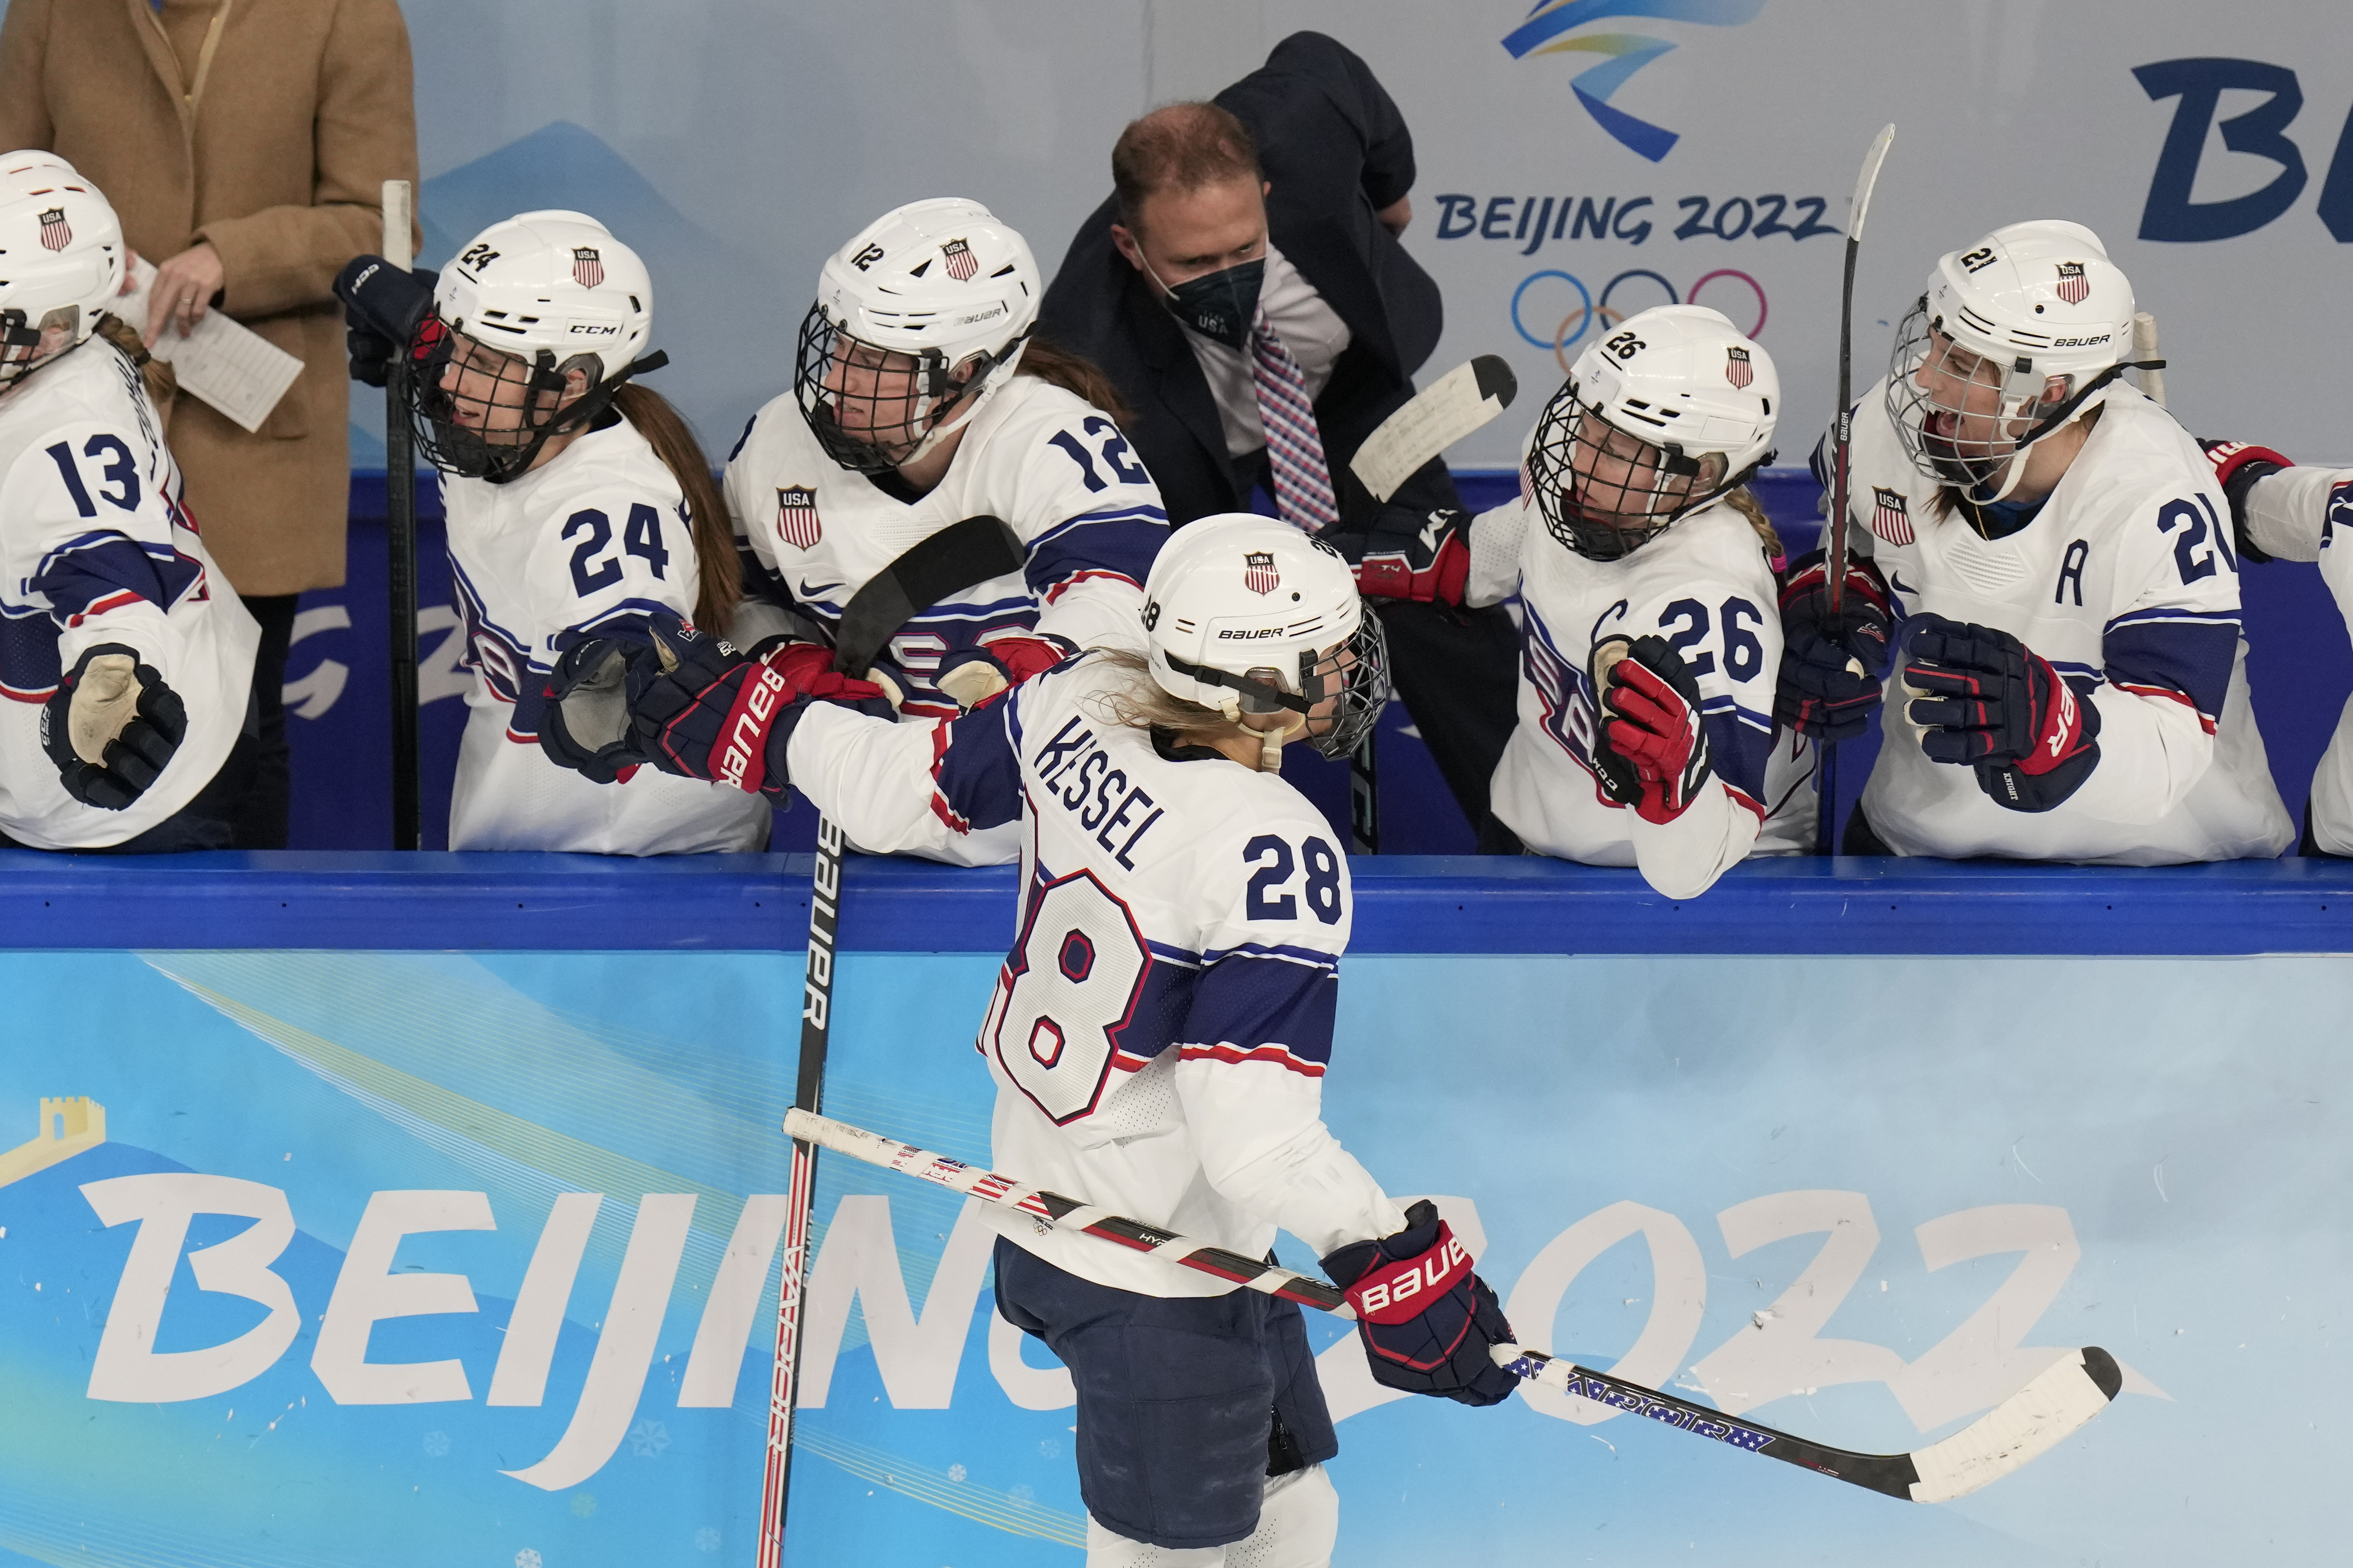 Women's ice hockey: USA beat Finland to set up gold medal showdown with  Canada, Winter Olympics 2018